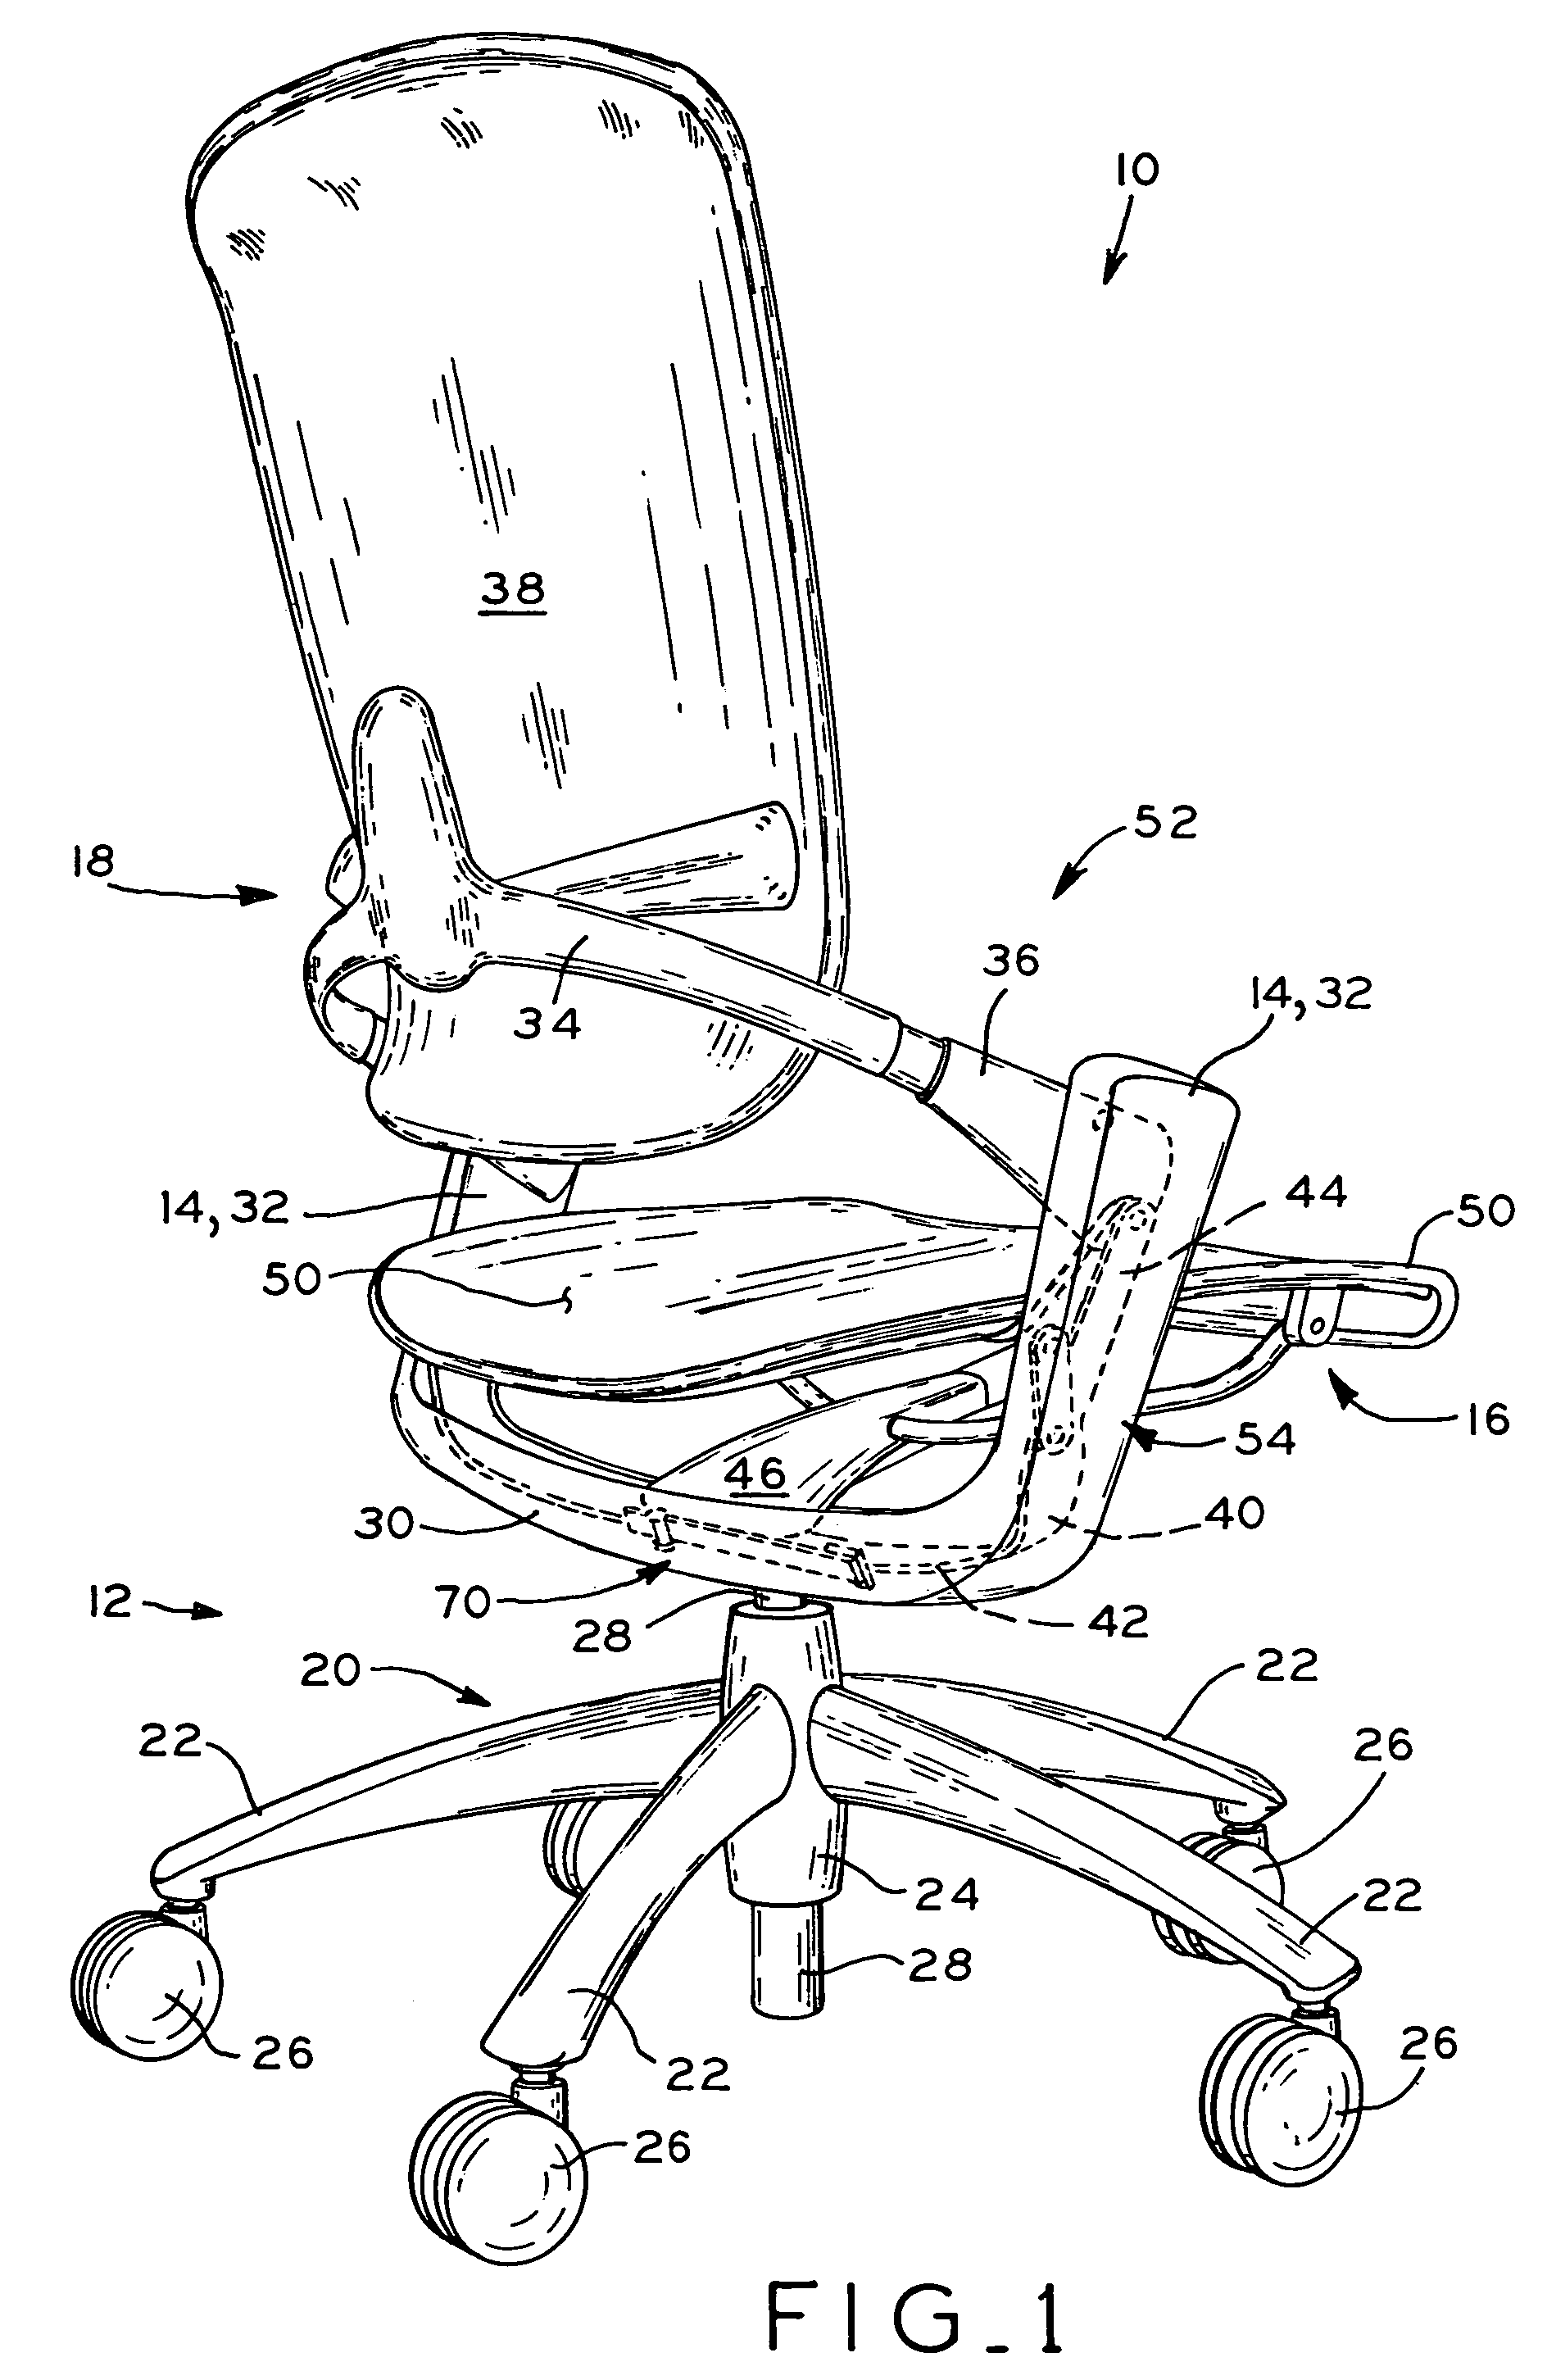 Chair ride mechanism with tension assembly